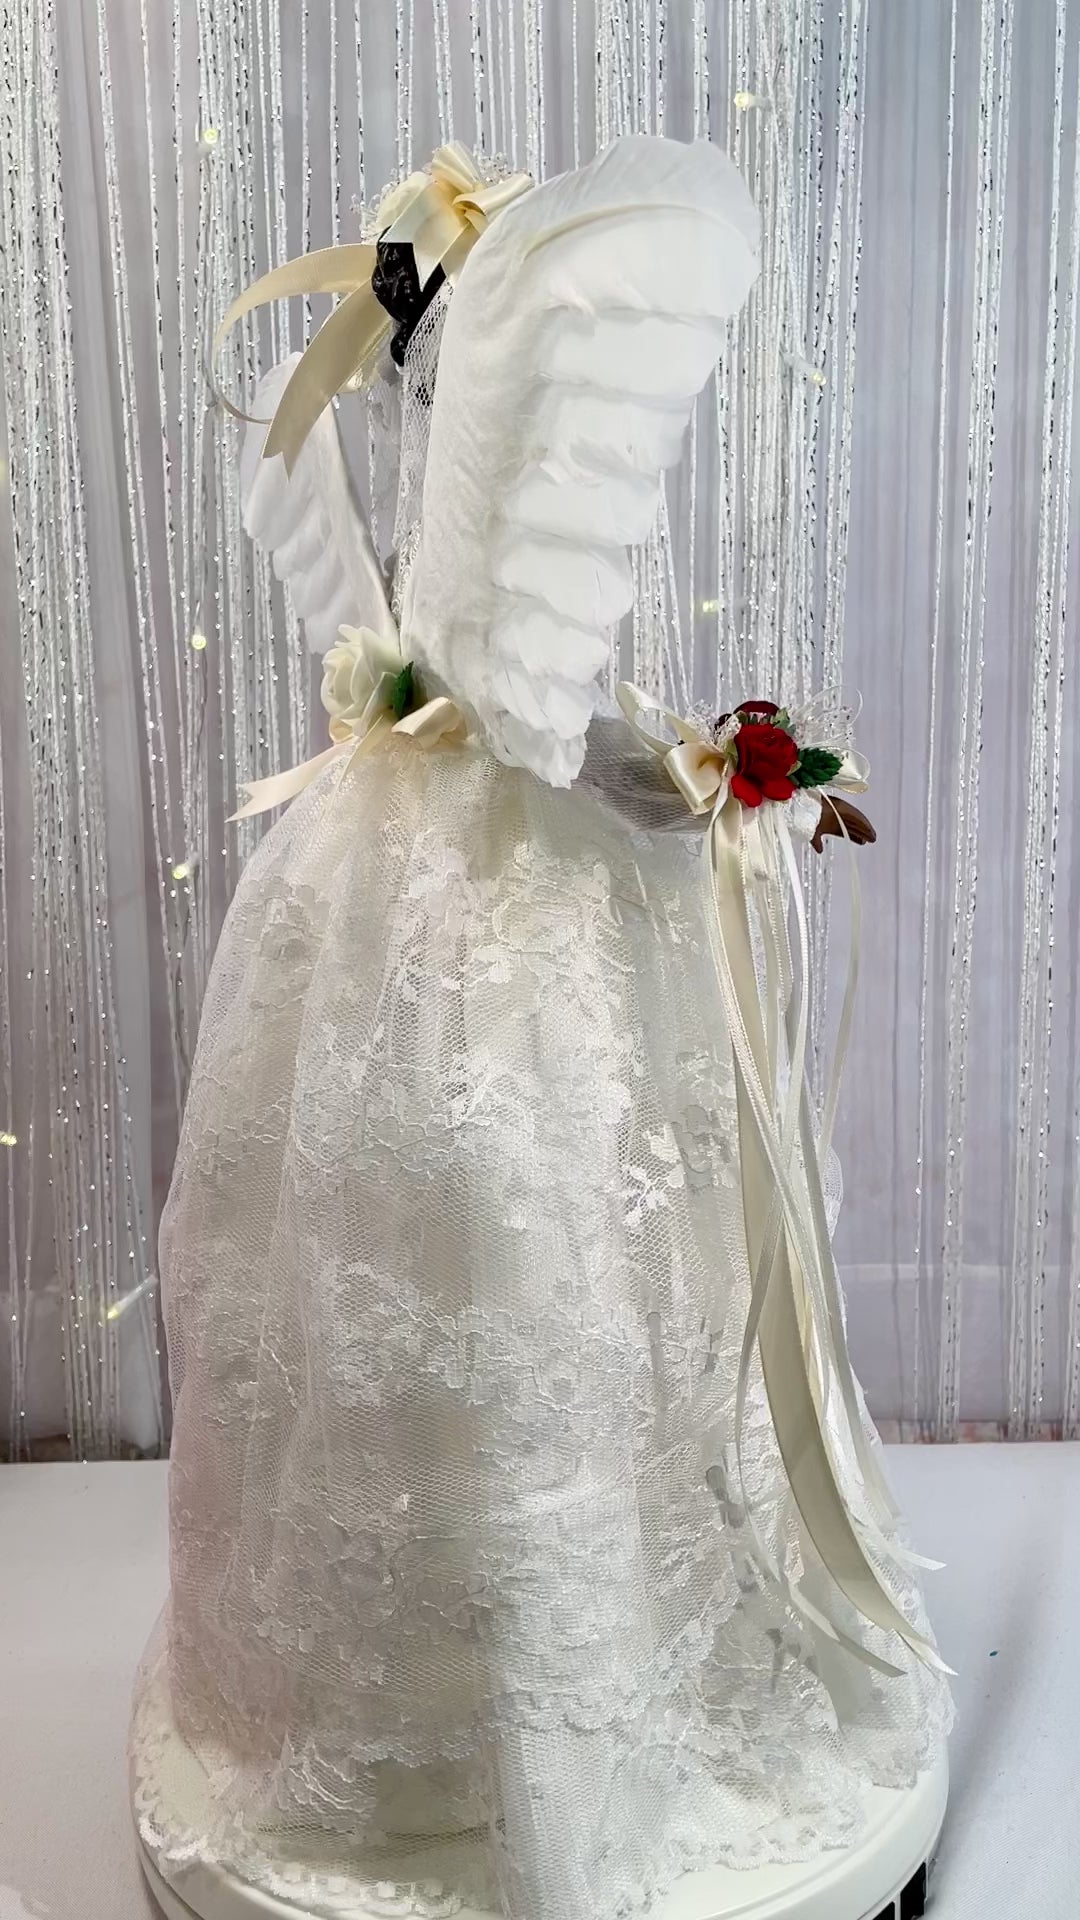 Video of an African American 18 inch tall Christmas Angel dressed in an ivory lace gown with red floral accents.